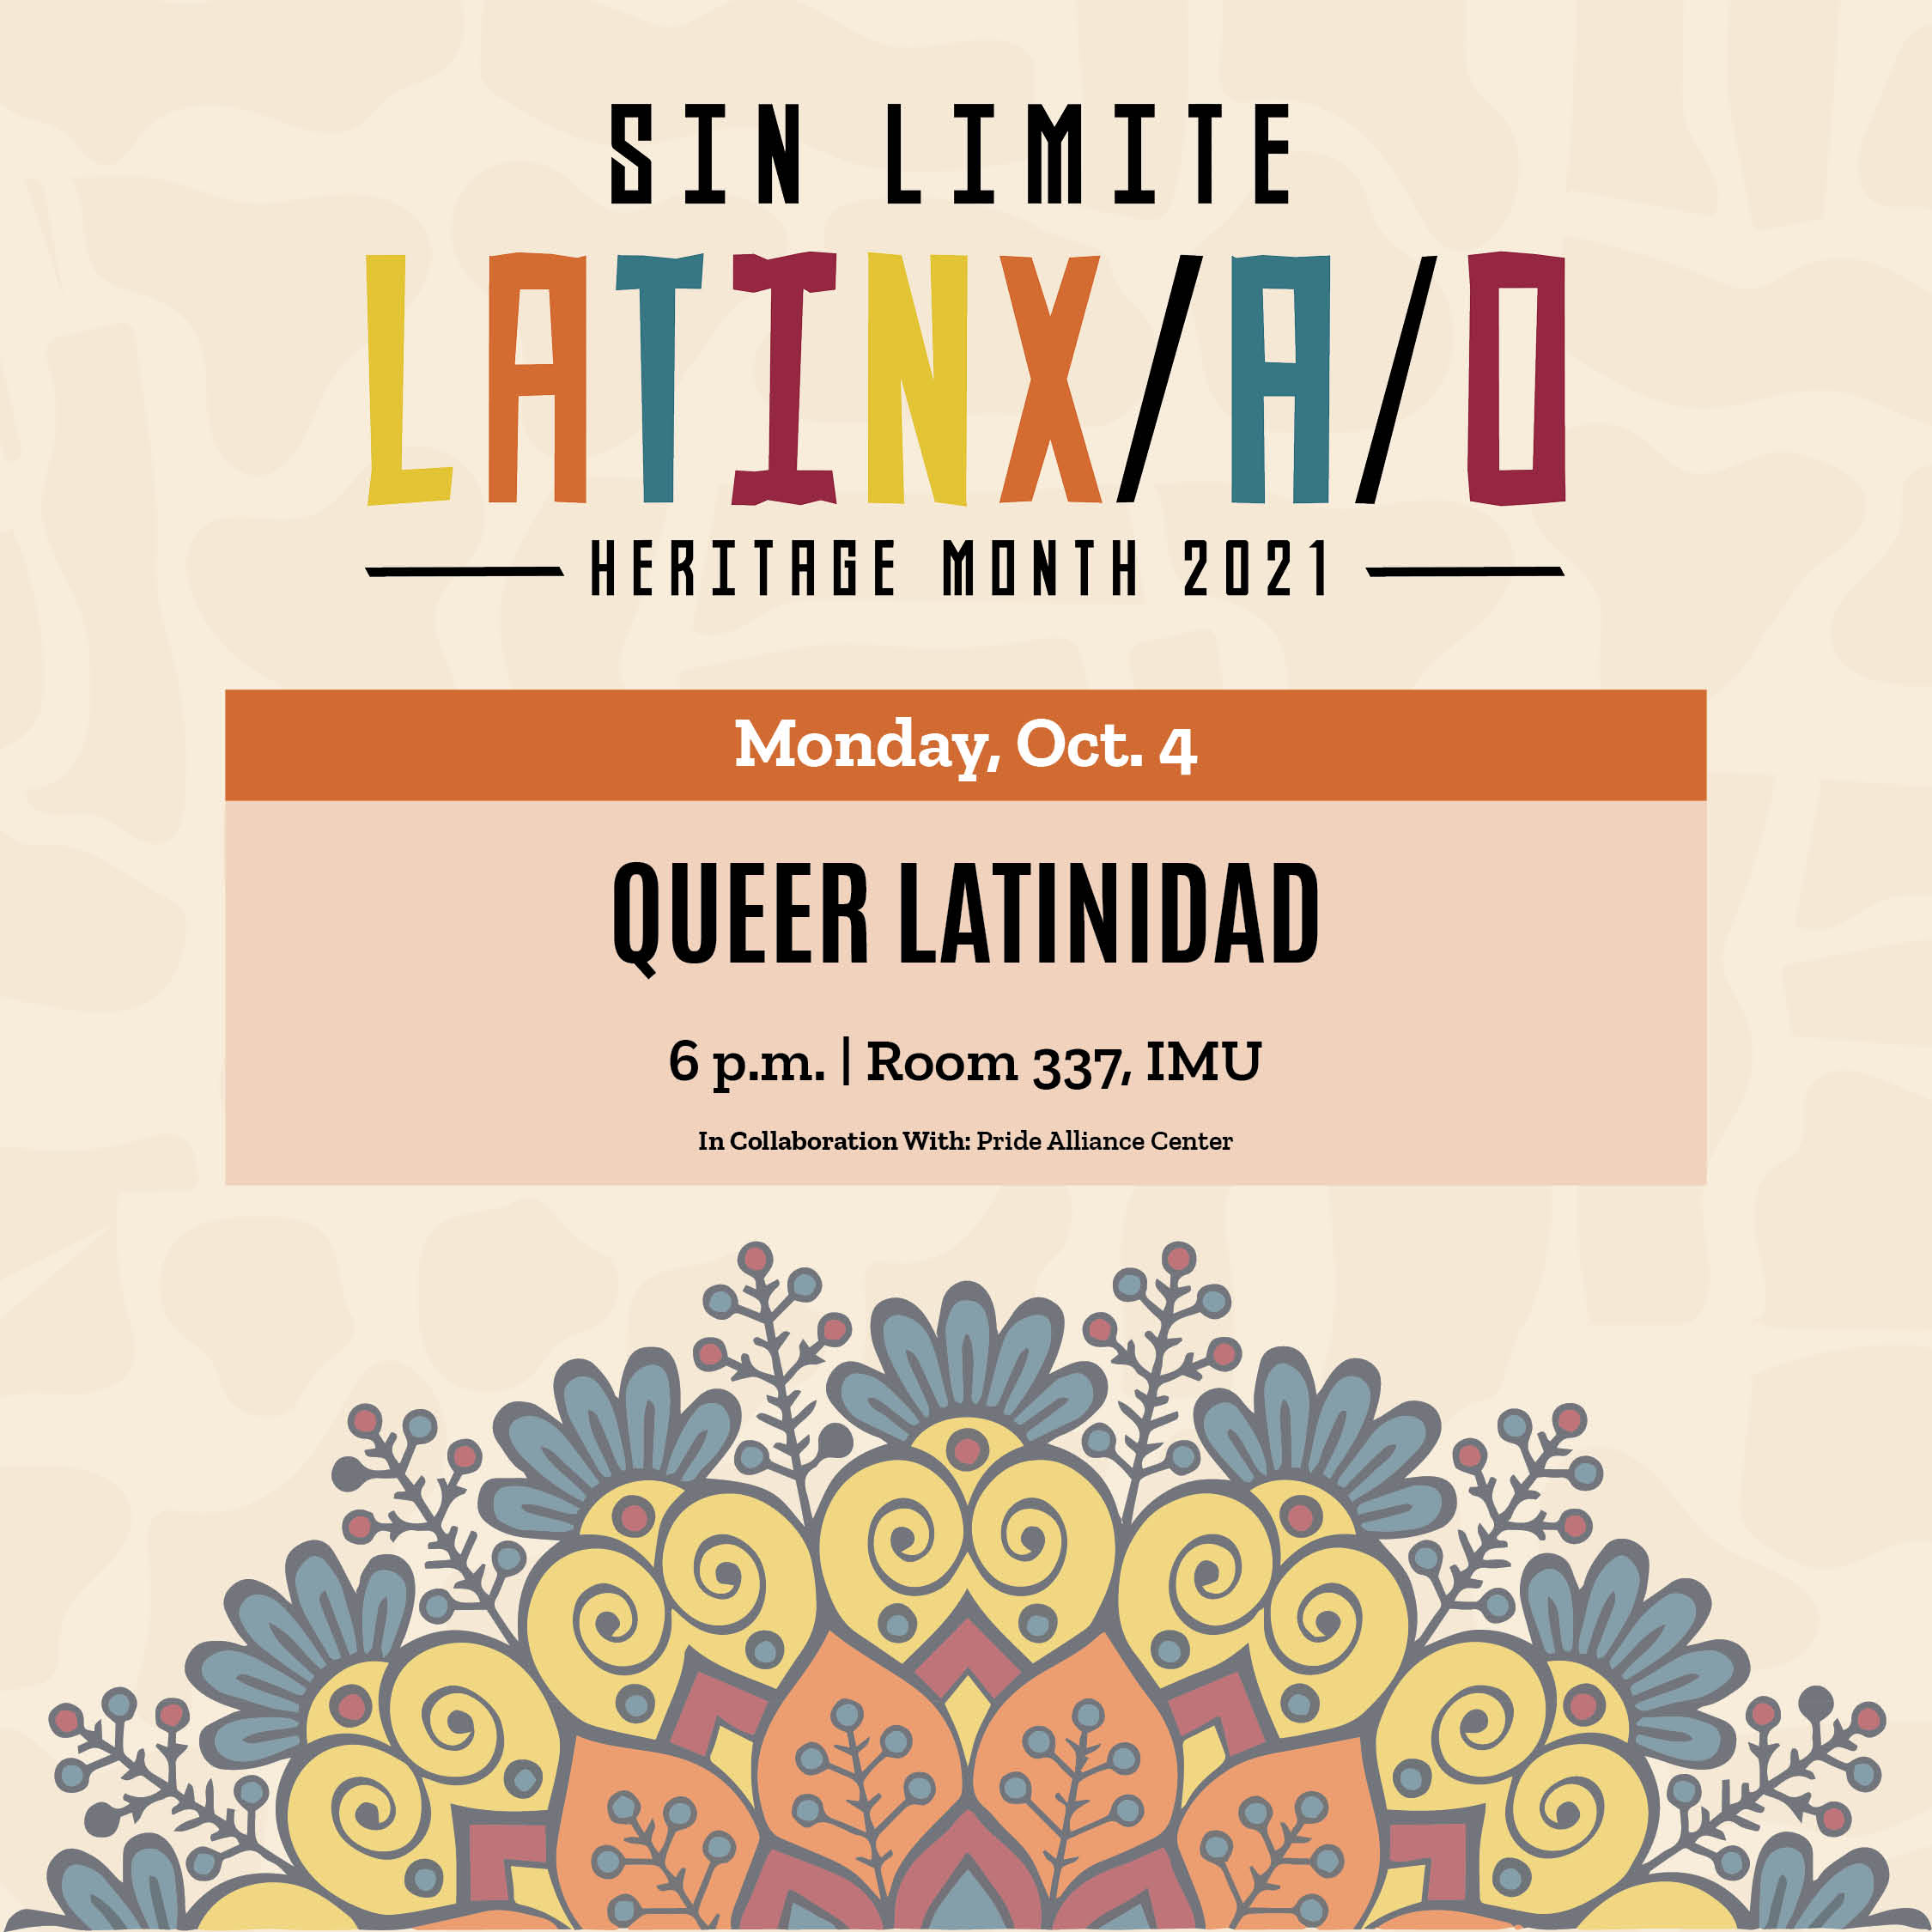 A floral design graphic with text that says 'SIN LIMITE LATINX/A/O HERITAGE MONTH 2021 Monday, Oct. 4 QUEER LATINIDAD p.m. Room 337 IMU Collaboration With Pride Alliance Center'